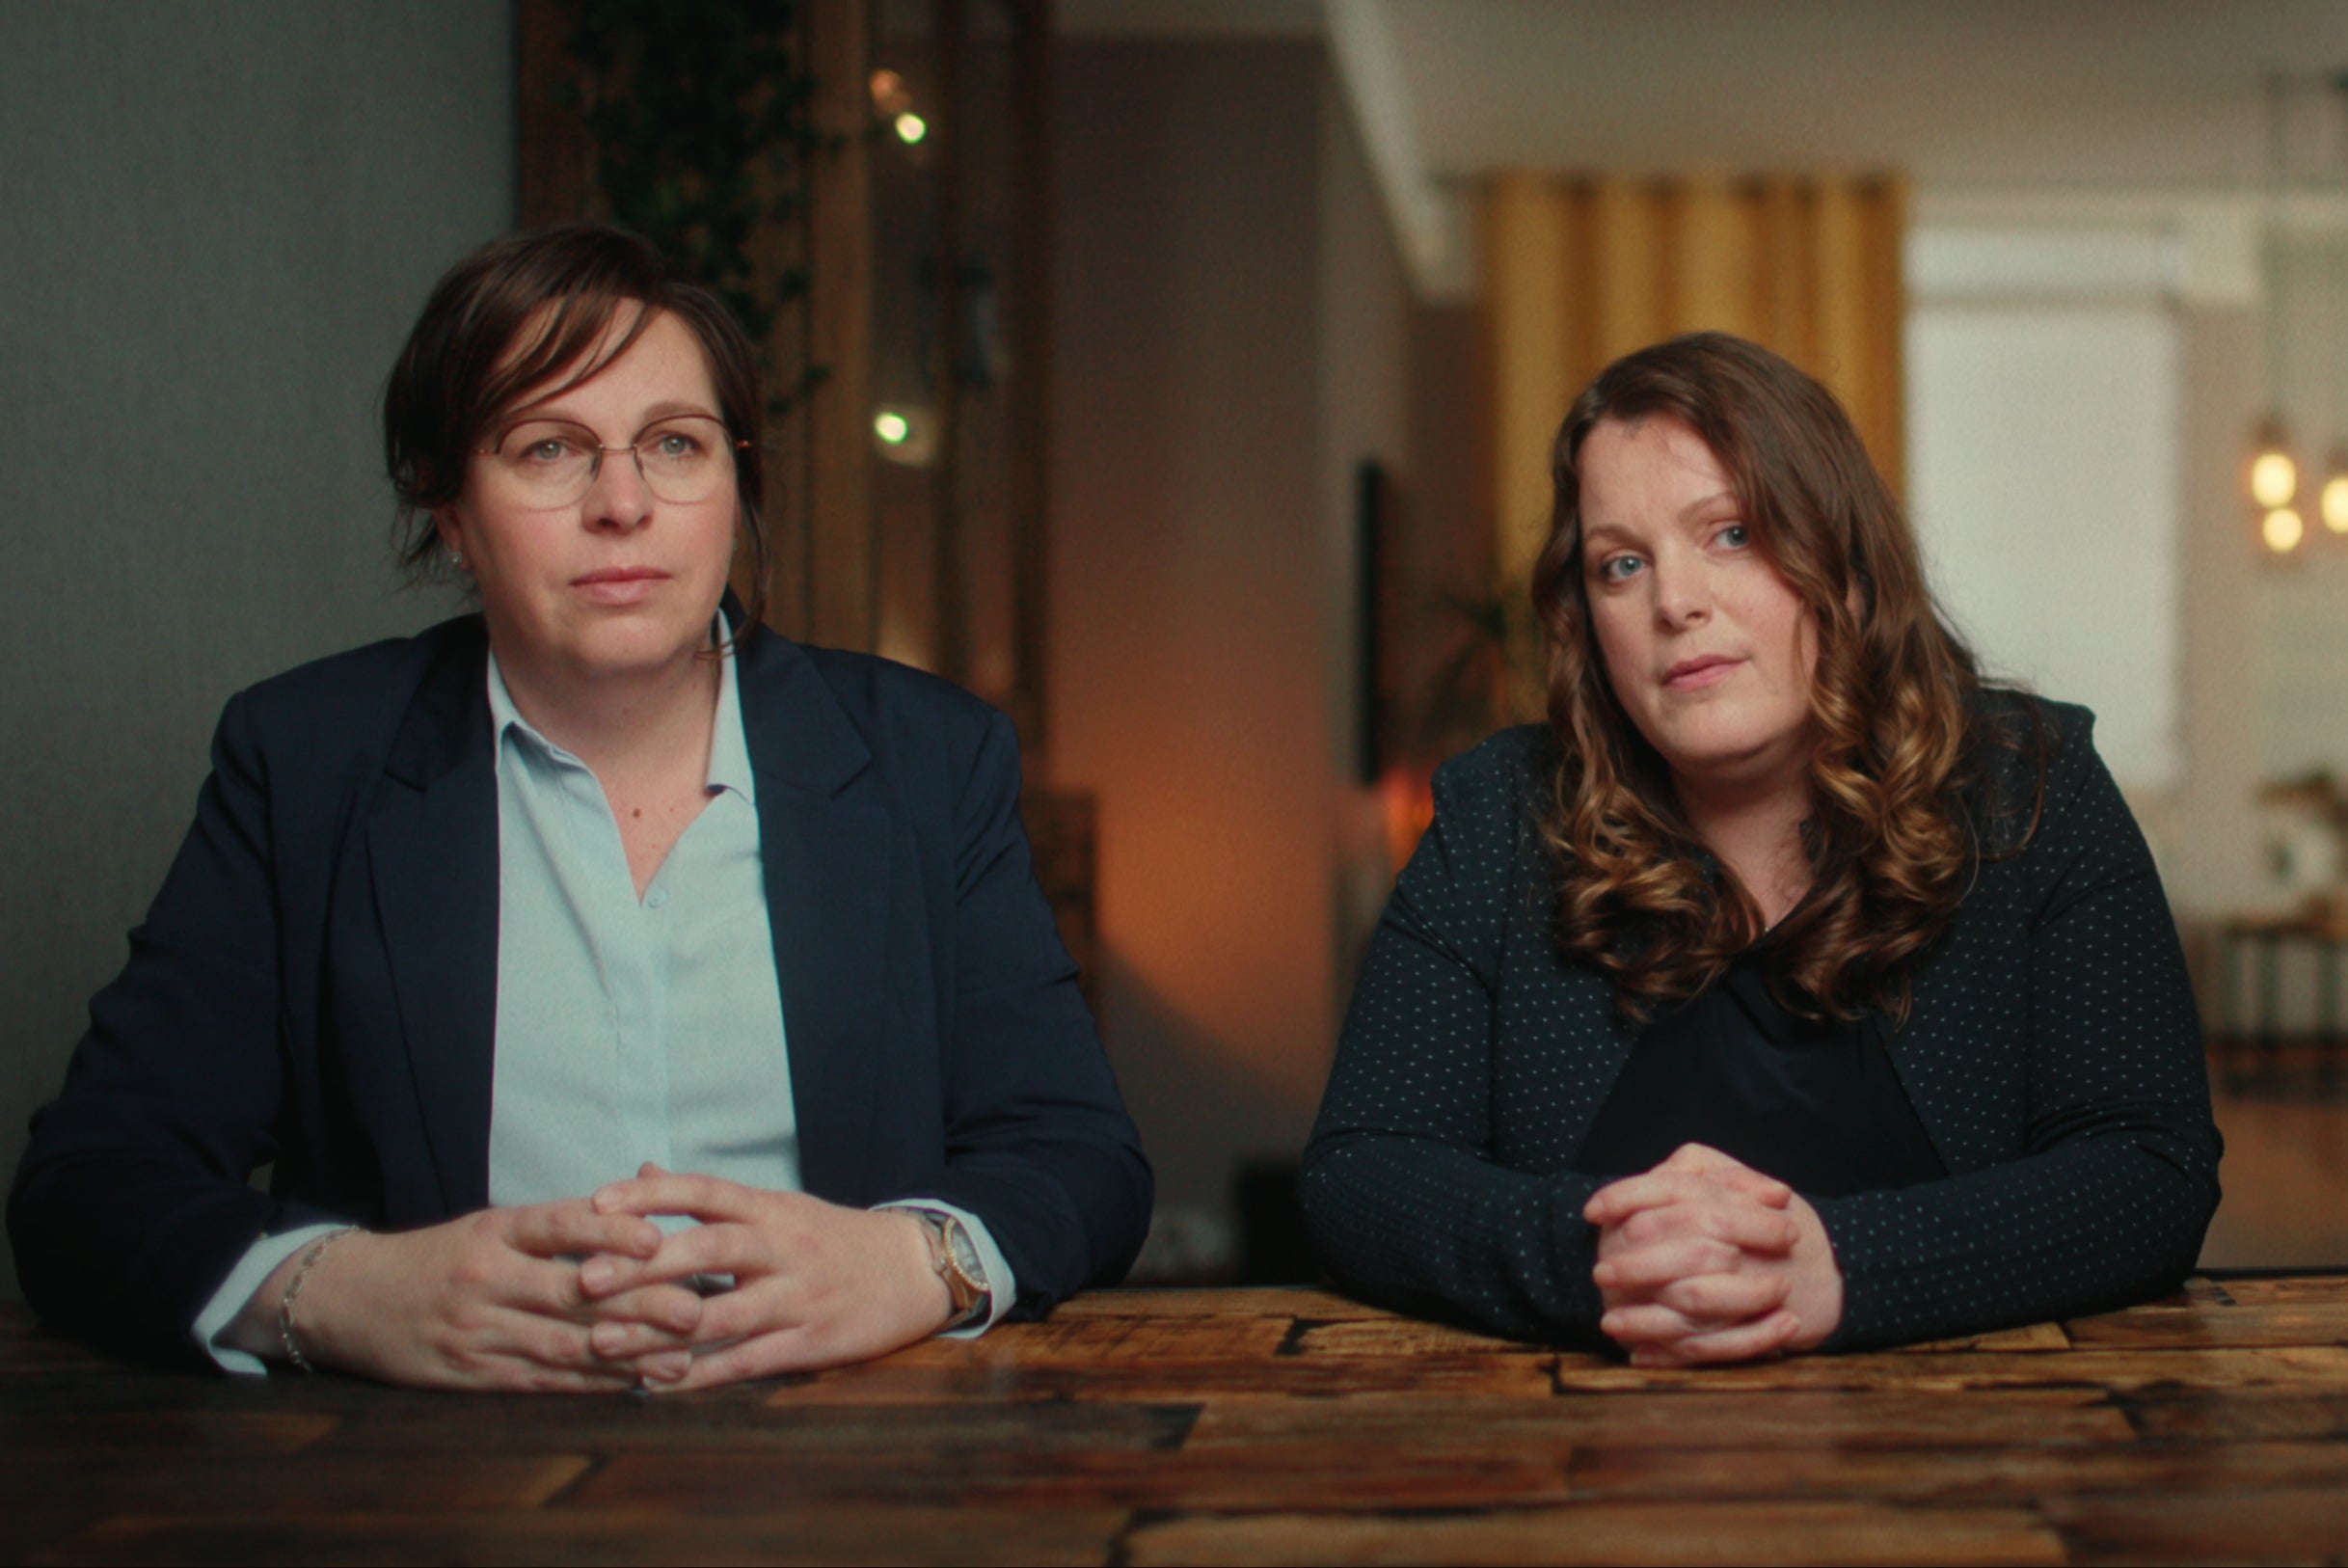 Donor mothers Suzanne and Natalie speak out against Jonathan Meijer in Netflix’s ‘The Man with 1000 Kids’